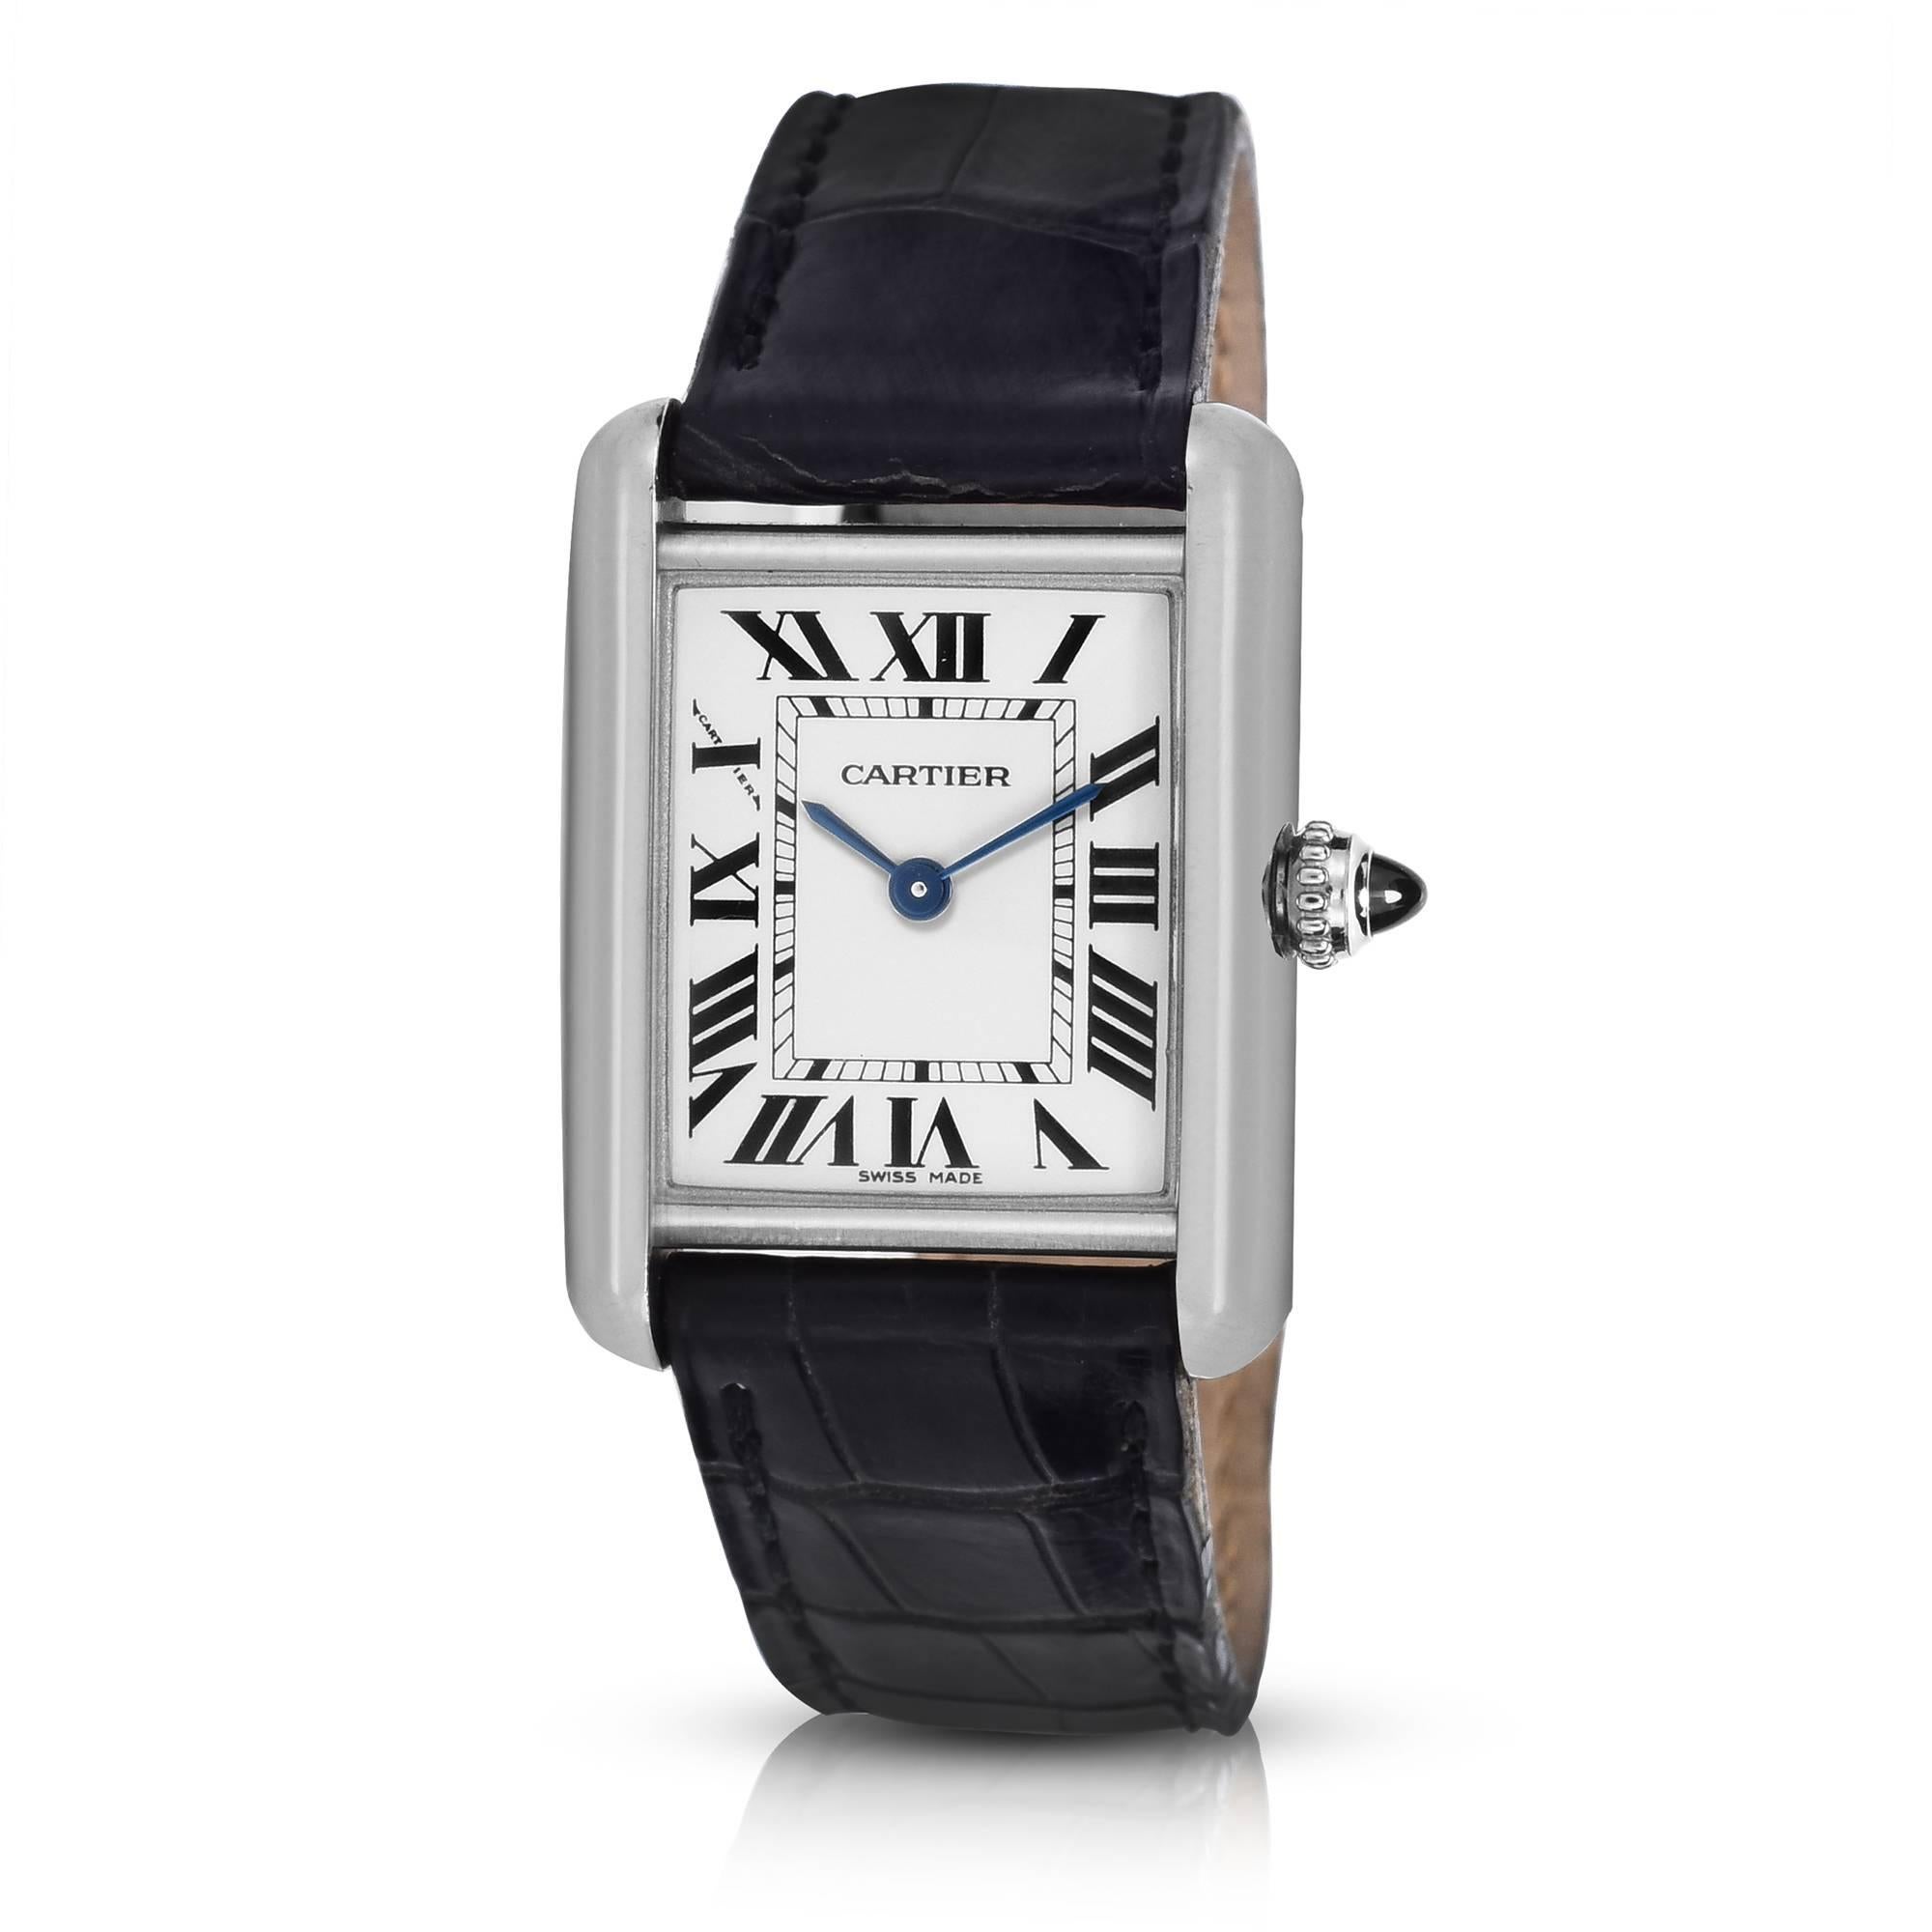 Cartier 18K White Gold Ladies Tank Quartz Watch Classic Cartier Tank Design with Roman Numeral Markers White Colored Dial with Cartier Blue Hands 22mm x 22mm Case Cartier Cabochon Crown Sapphire Crystal Quartz Movement Comes Fitted on A Pre-Owned